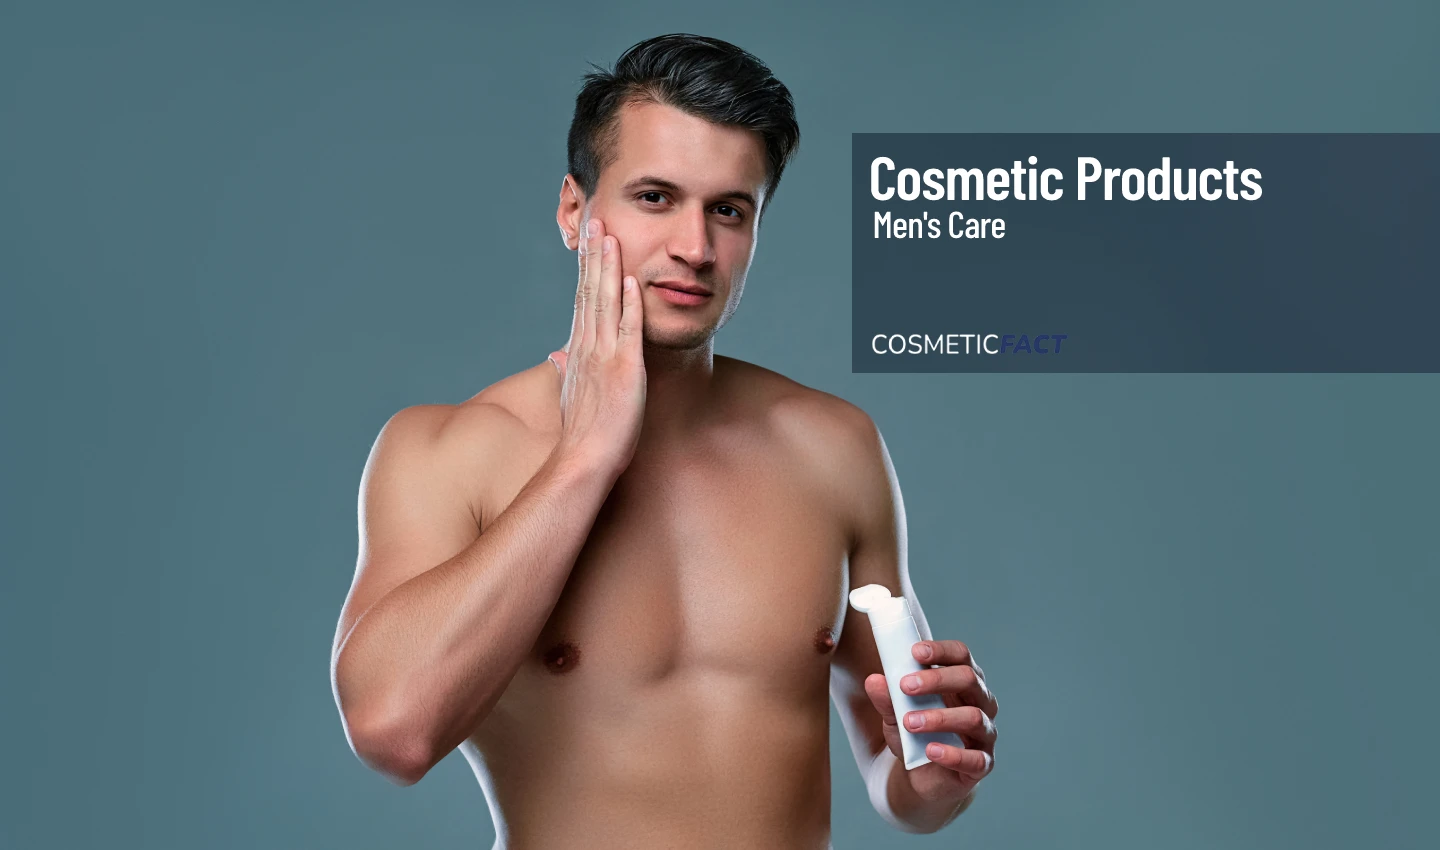 Men's Body Care for Sensitive Skin - An image of a well-shaped young man looking at the camera and touching his face. The man's healthy and glowing skin emphasizes the importance of taking care of your skin, especially if you have sensitive skin.